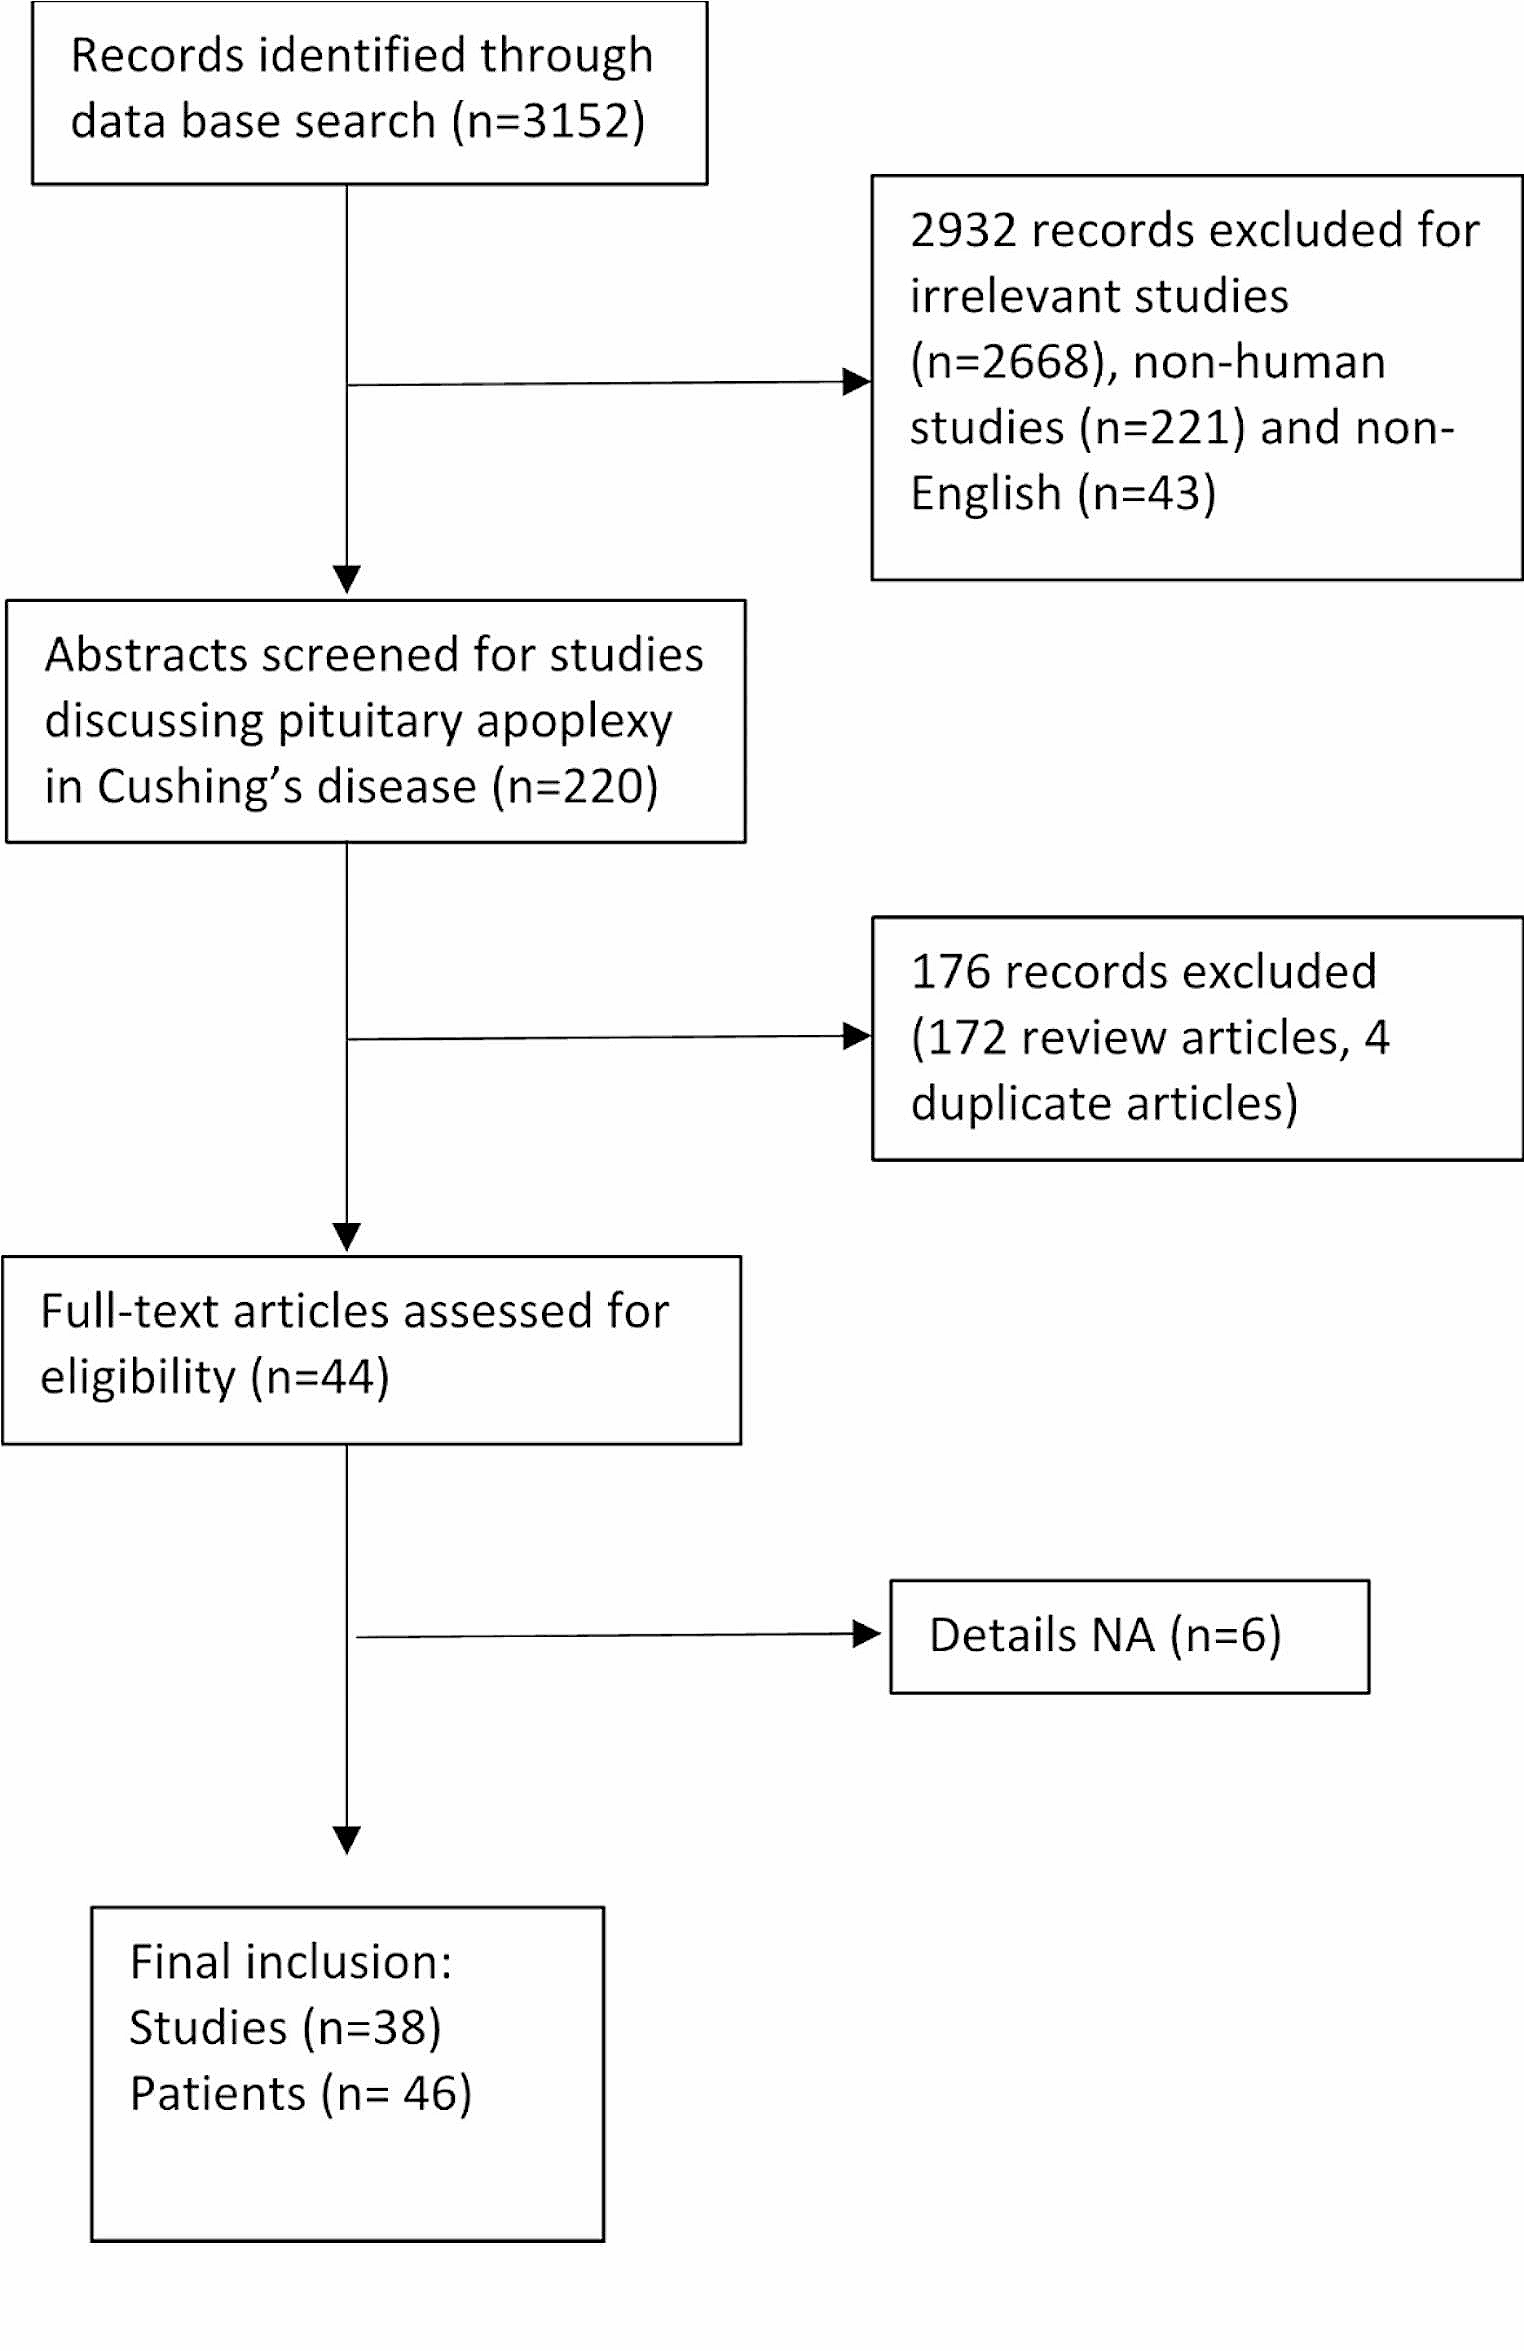 Pituitary apoplexy in cushing’s disease: a single center study and systematic literature review